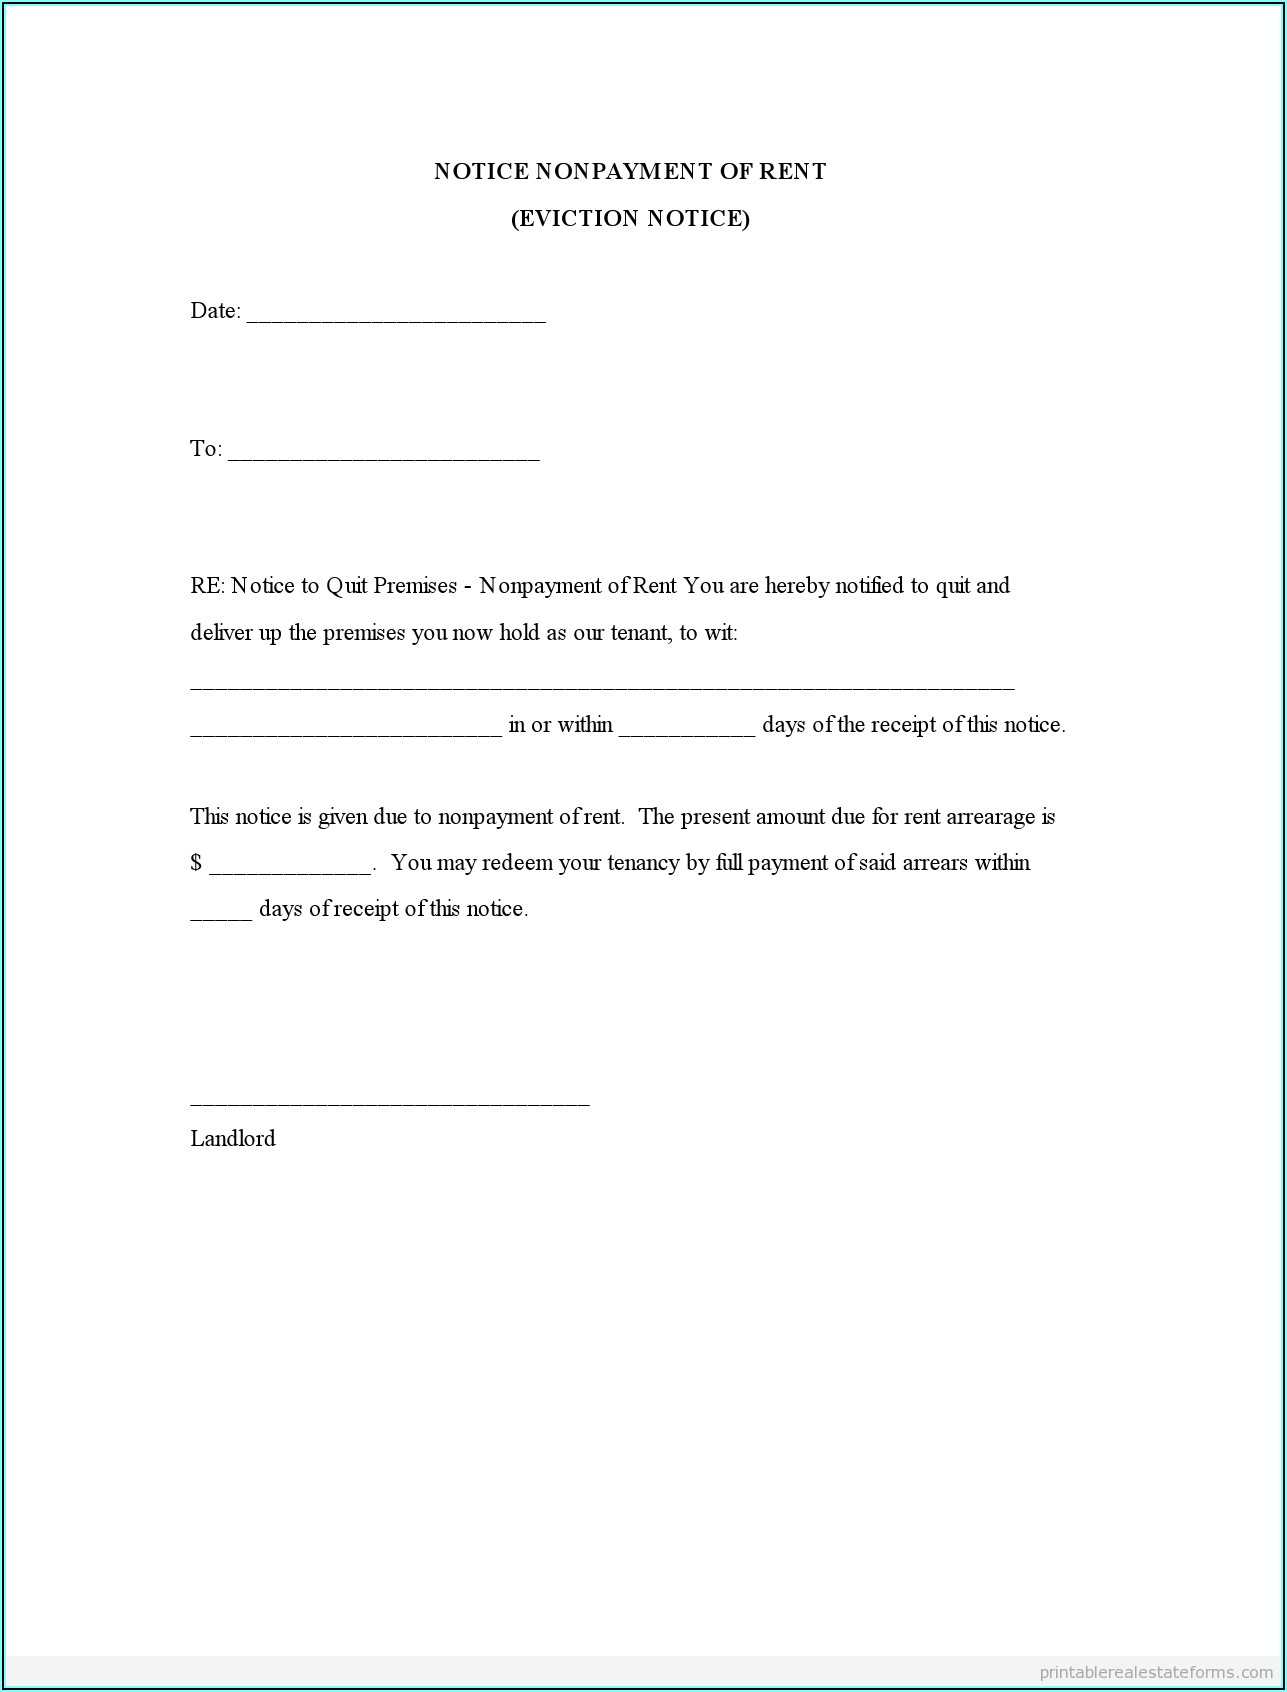 Printable Free Eviction Notice Forms